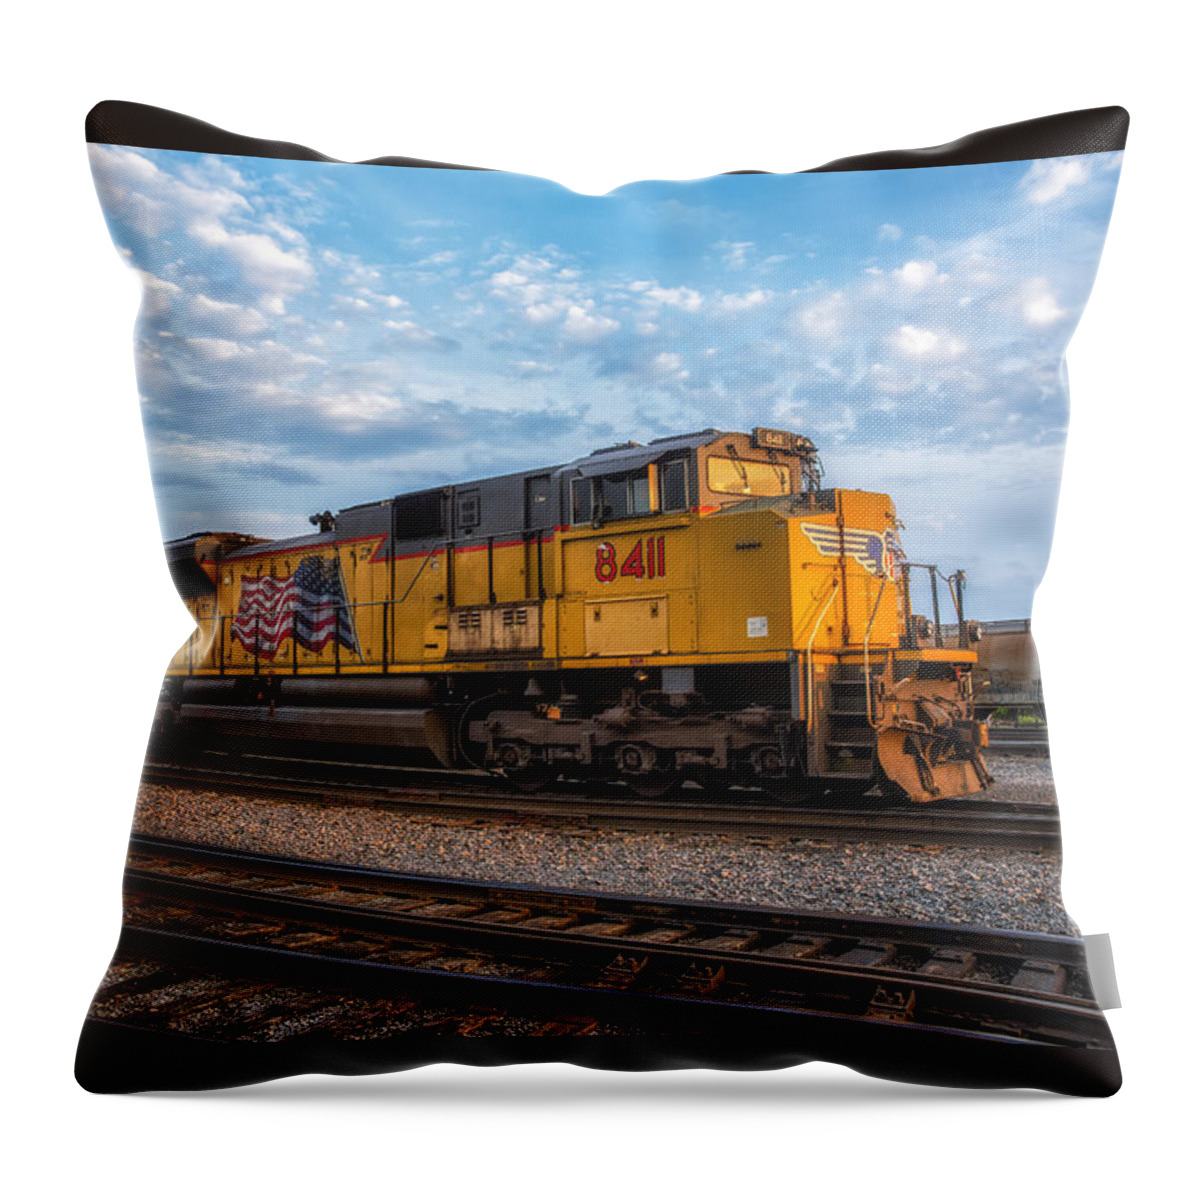 Union Pacific Train Throw Pillow featuring the photograph Union Pacific Railroad by Mark Papke